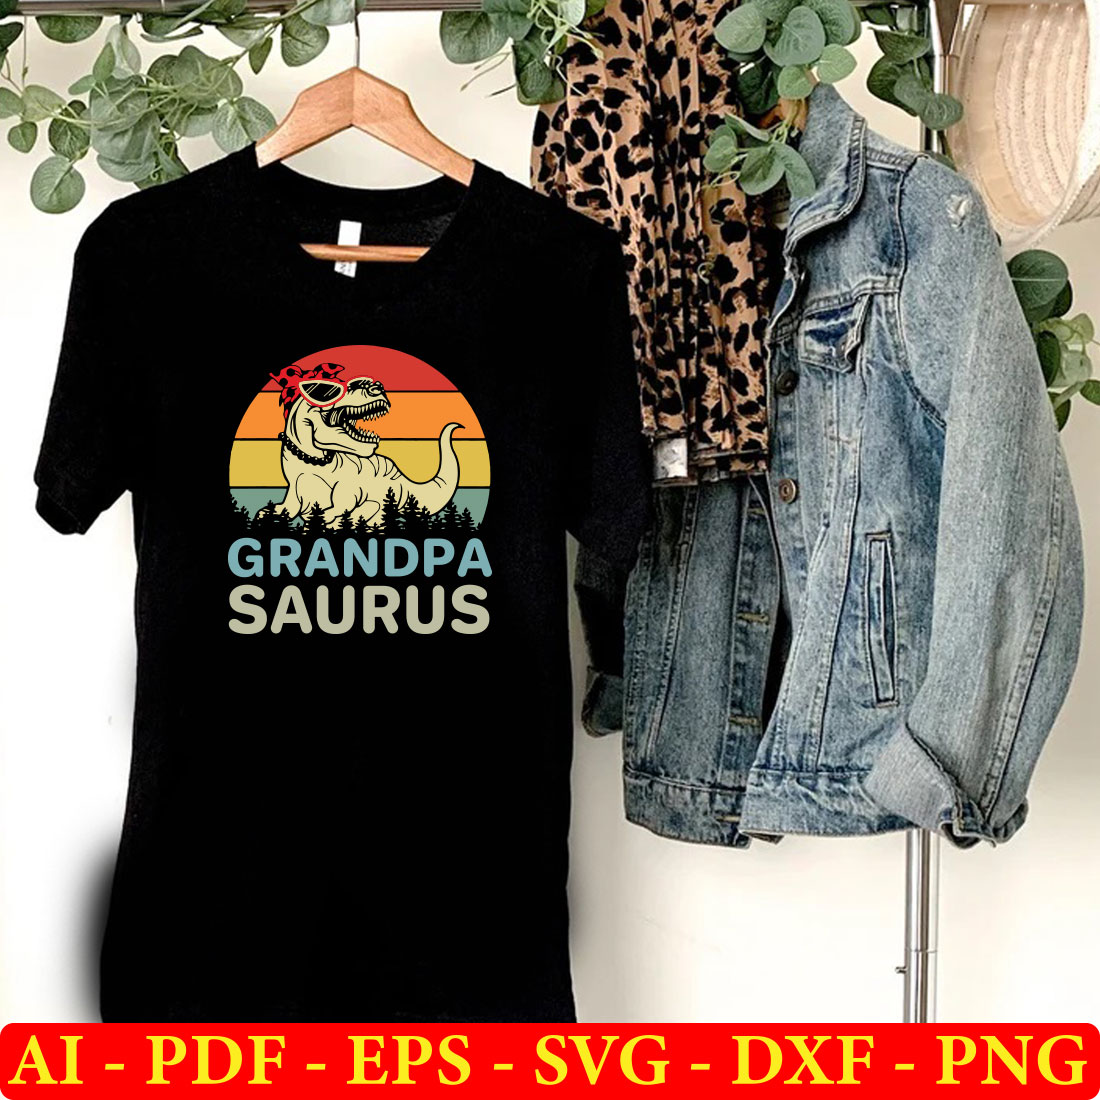 T - shirt that says grandpa saurus next to a pair of jeans.